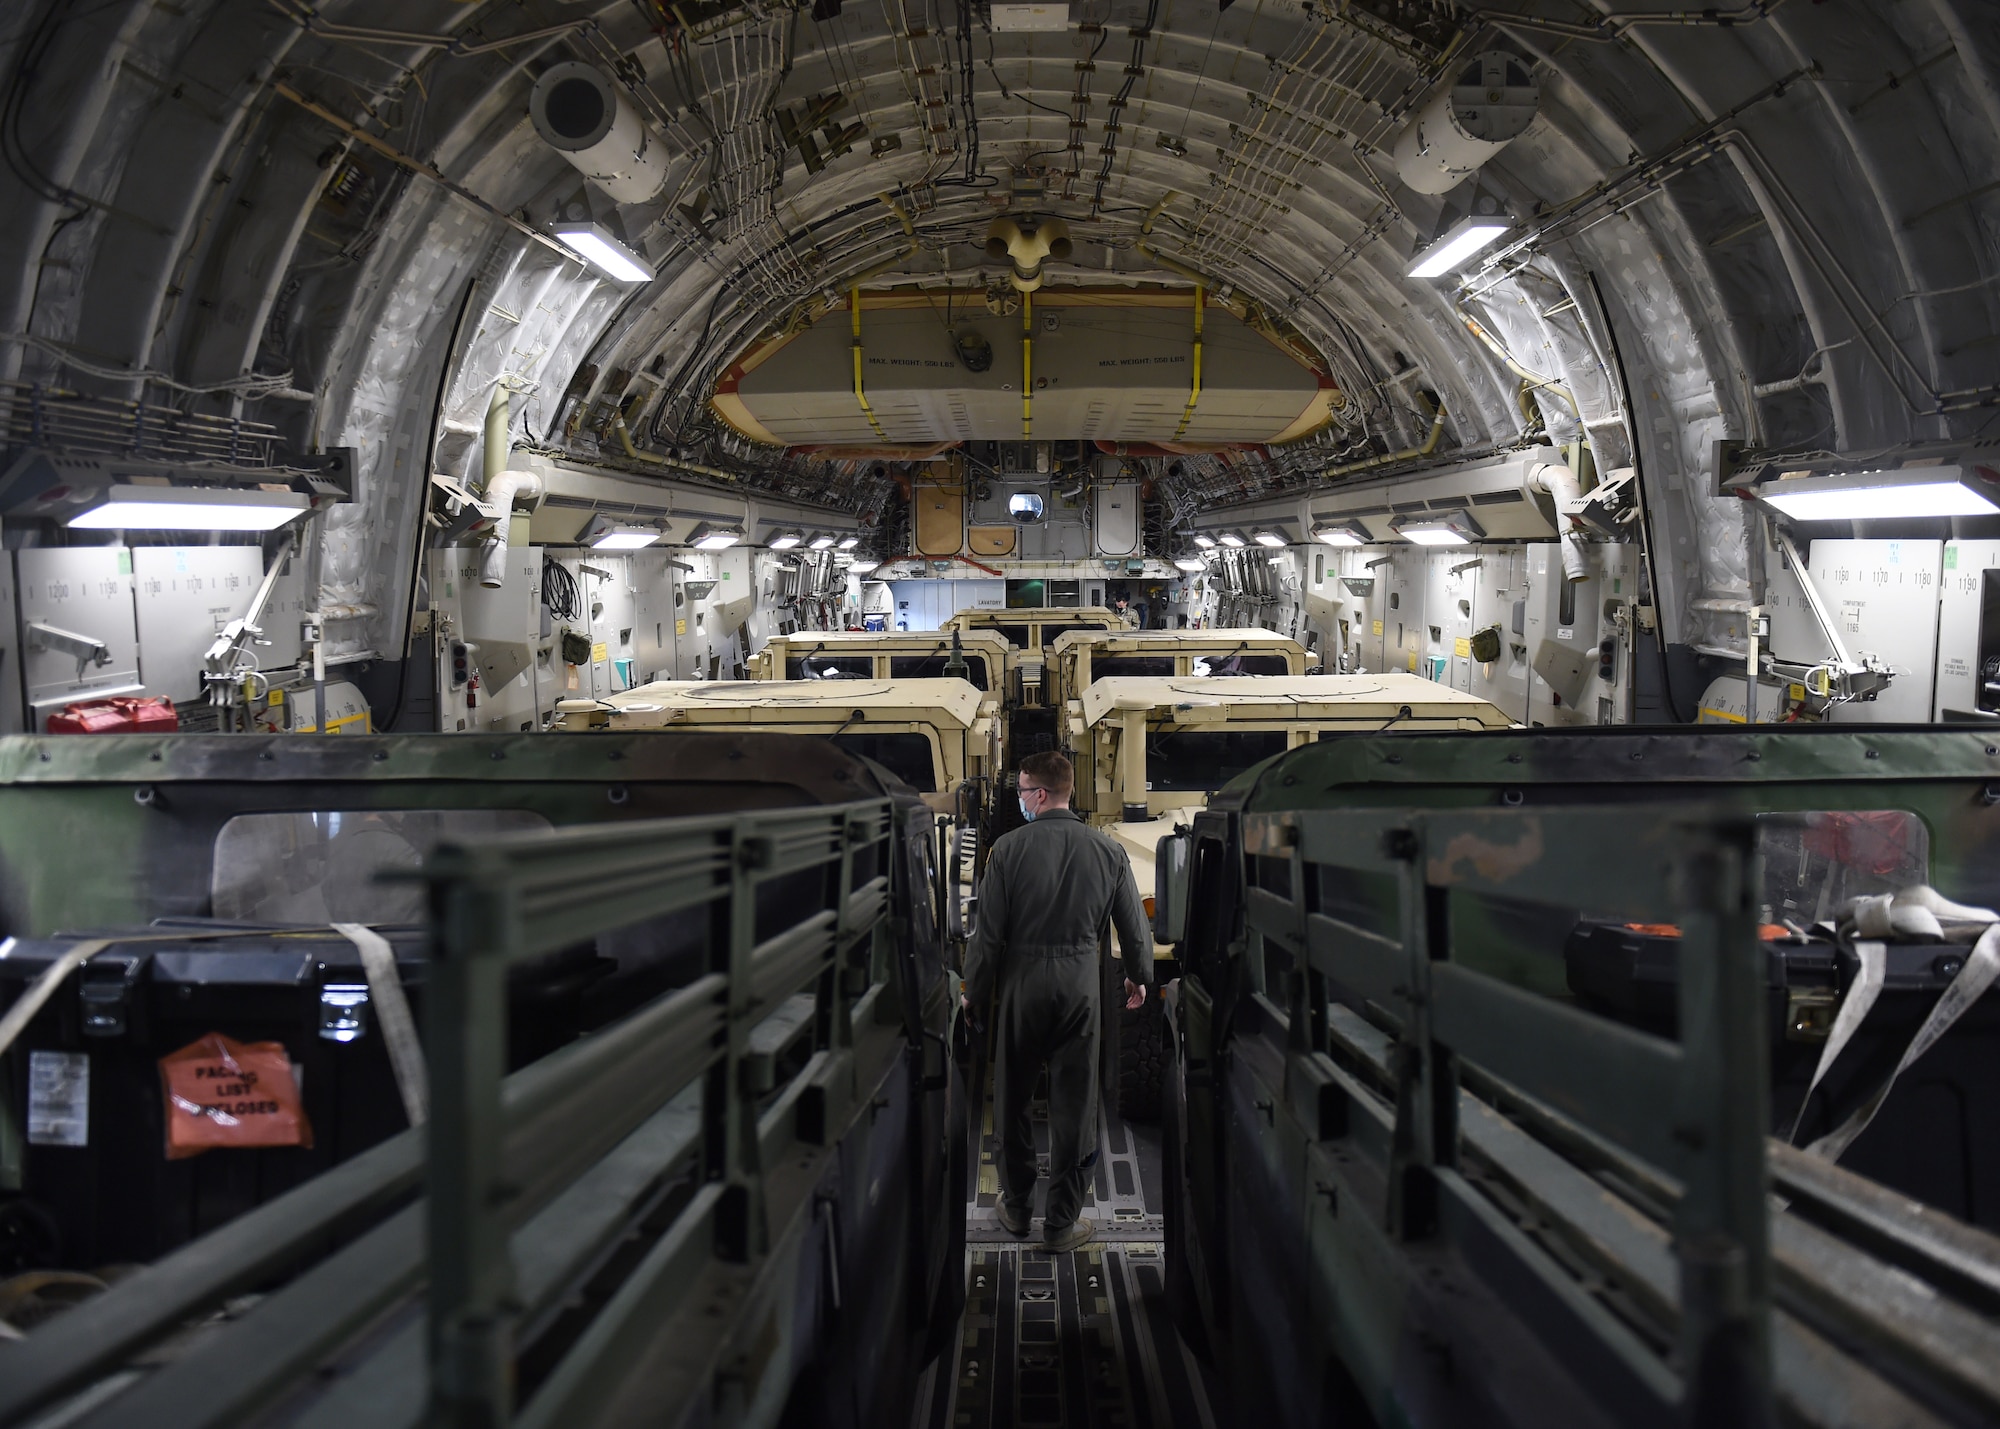 Senior Airman Connor Smith, 4th Airlift Squadron loadmaster, inspects cargo to make sure it is safely secured on a C-17 Globemaster III before taking off from Joint Base Lewis-McChord, Wash., Aug. 5, 2020. The C-17 Globemaster III can carry up to over 160 thousand pounds of cargo. (US Air Force photo by Airman 1st Class Mikayla Heineck)